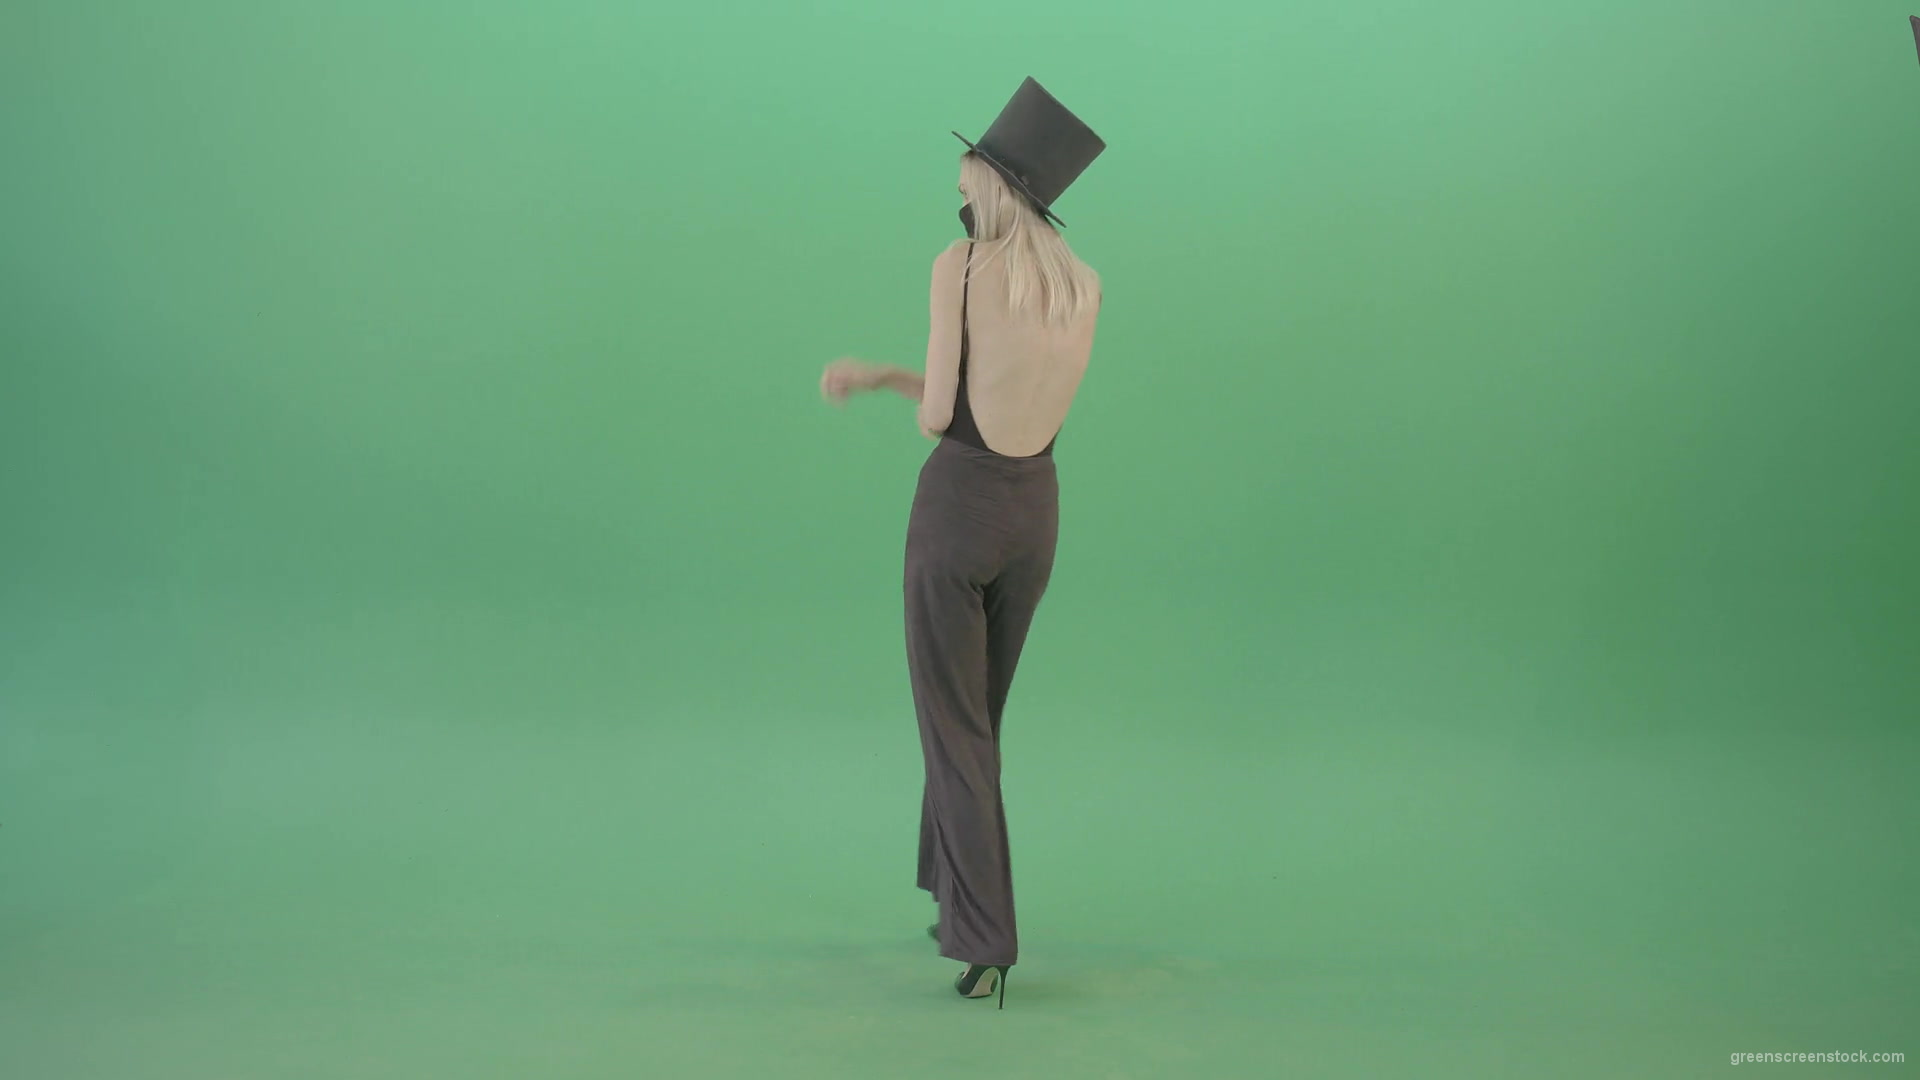 Covid-Mask-Girl-in-Black-cylinder-Hat-dancing-in-front-and-back-side-view-isolated-on-green-screen-Video-Footage-1920_006 Green Screen Stock